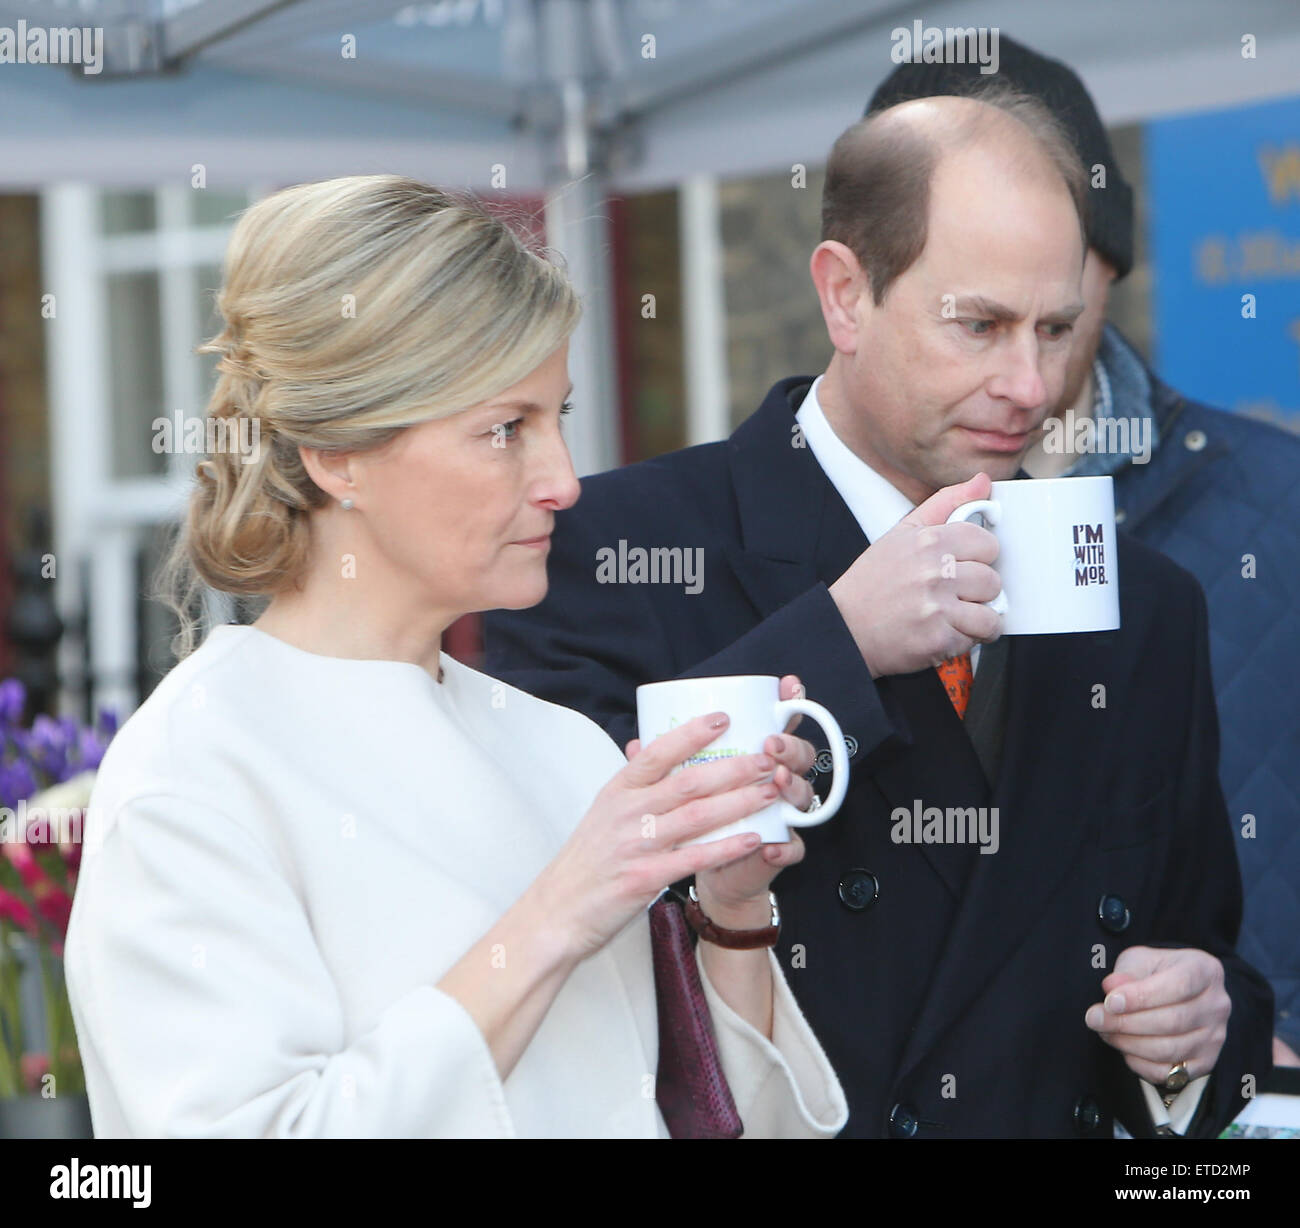 The Earl and Countess of Wessex visit Tomorrow's People Social Enterprise's at St. Anselm'a Church in Kennington on her 50th birthday  Featuring: Sophie Countess of Wessex, Prince Edward Where: London, United Kingdom When: 20 Jan 2015 Credit: WENN.com Stock Photo